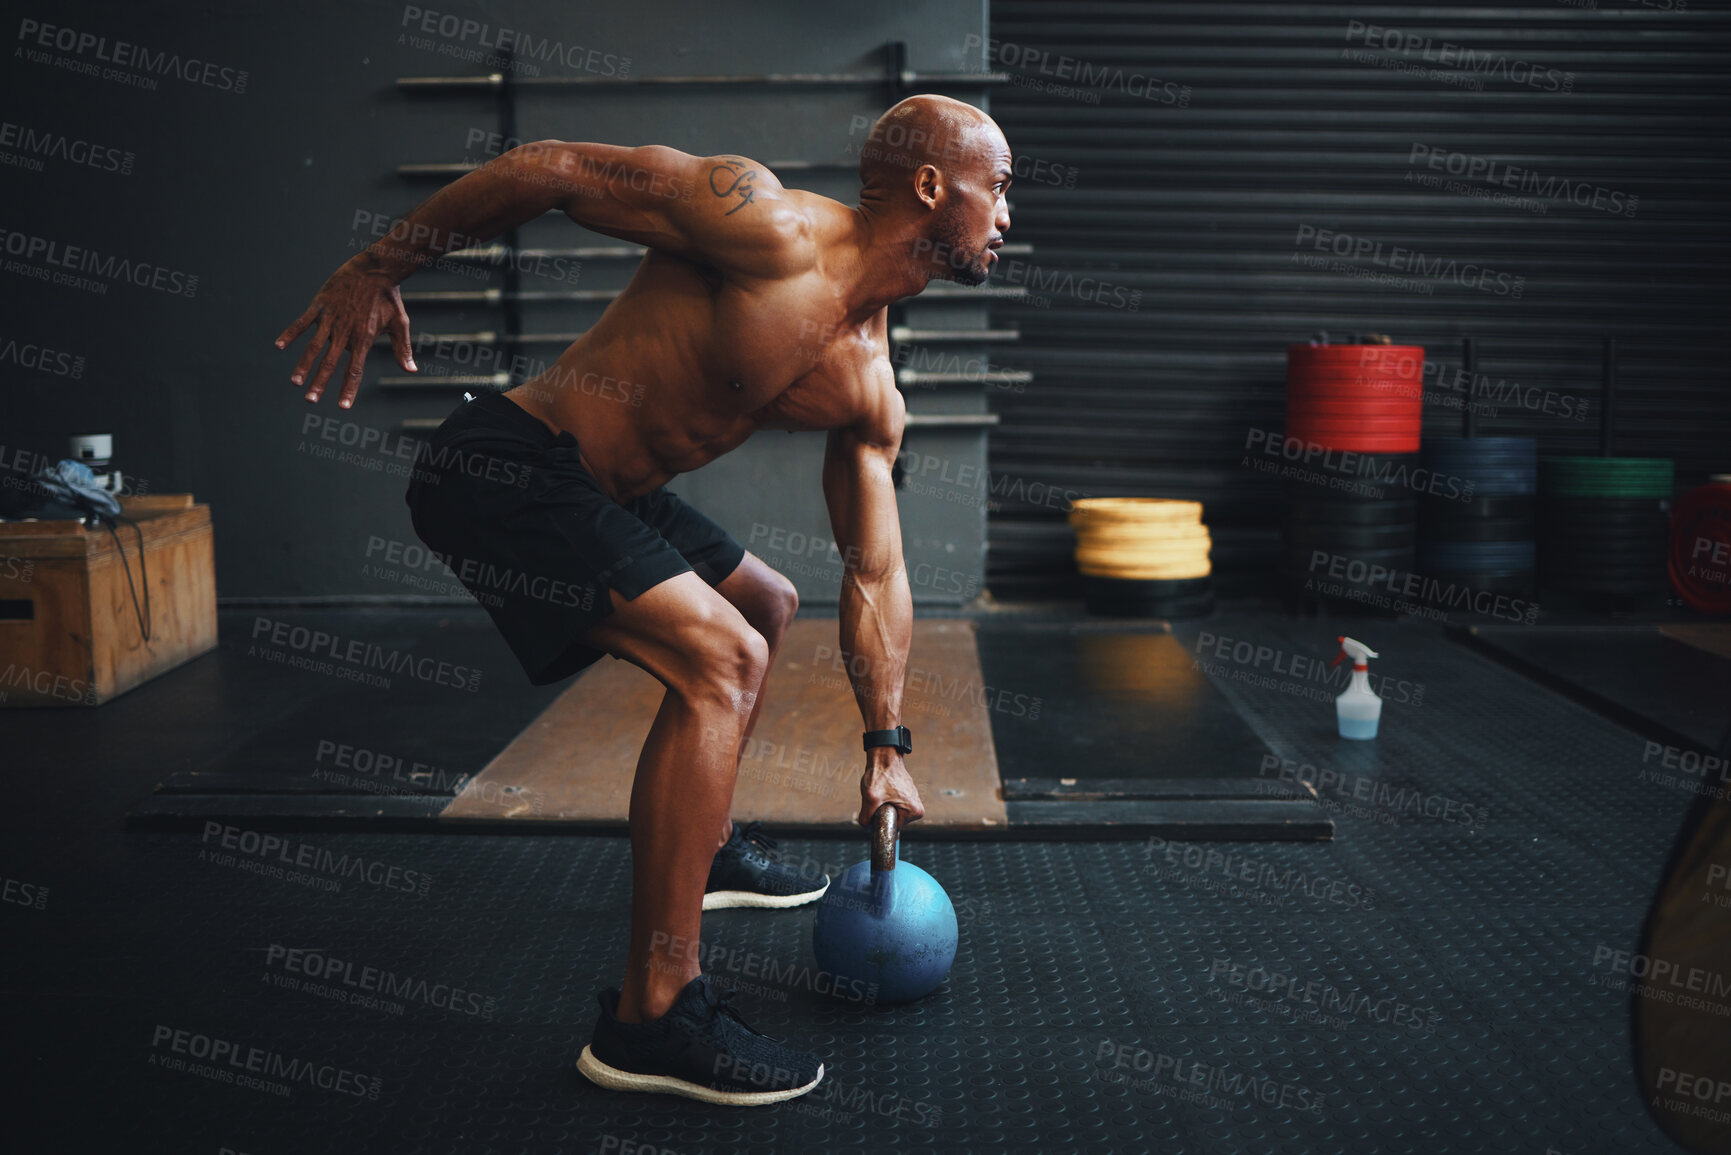 Buy stock photo Shot of a muscular young man exercising with a kettlebell in a gym